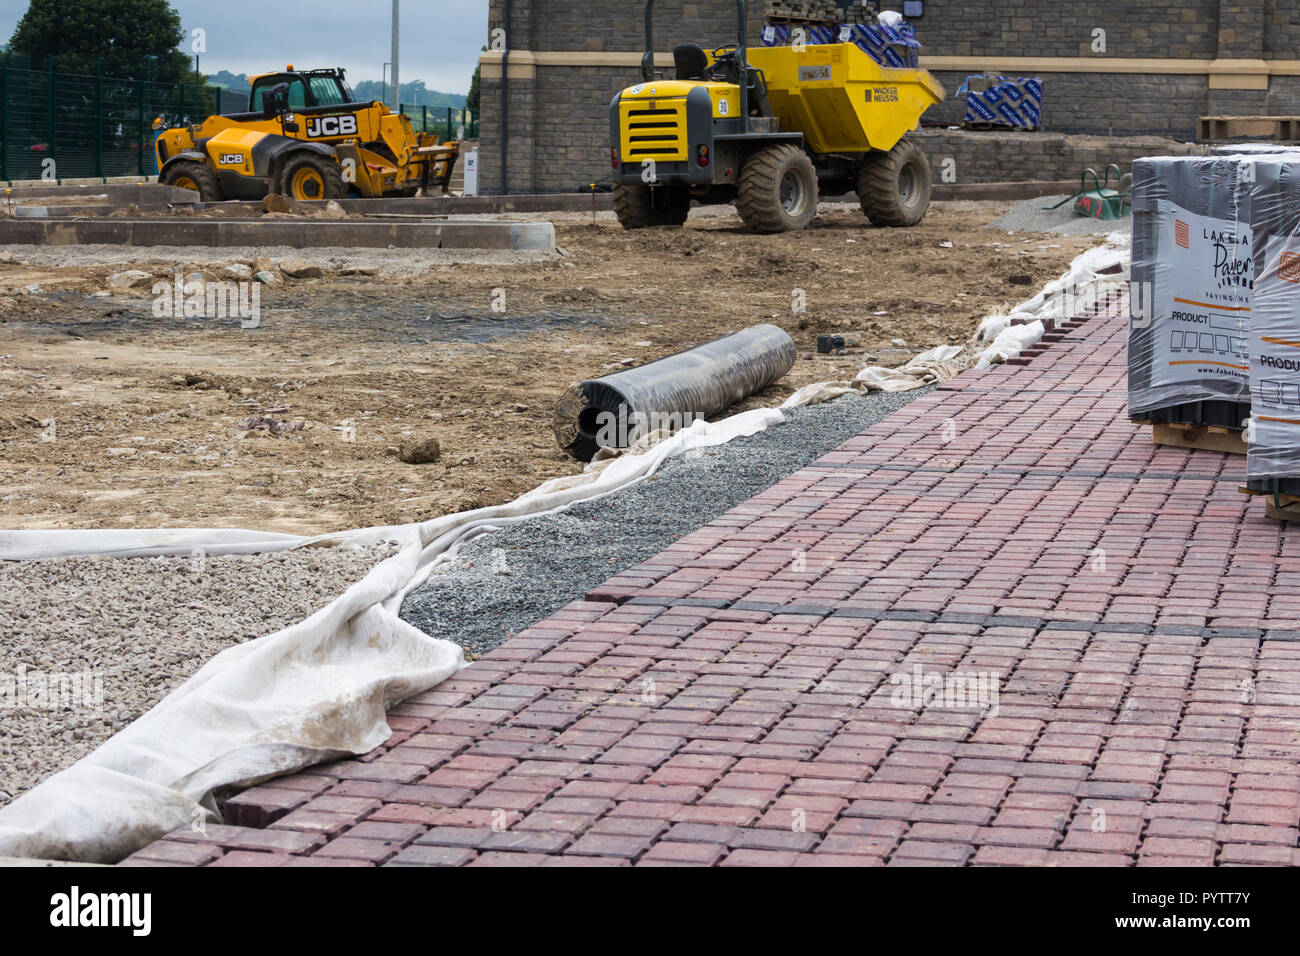 Block paving being laid with sub-base materials visible in the new car park at  Mint Bridge, the new rugby union football ground in Kendal, Cumbria.   Stock Photo